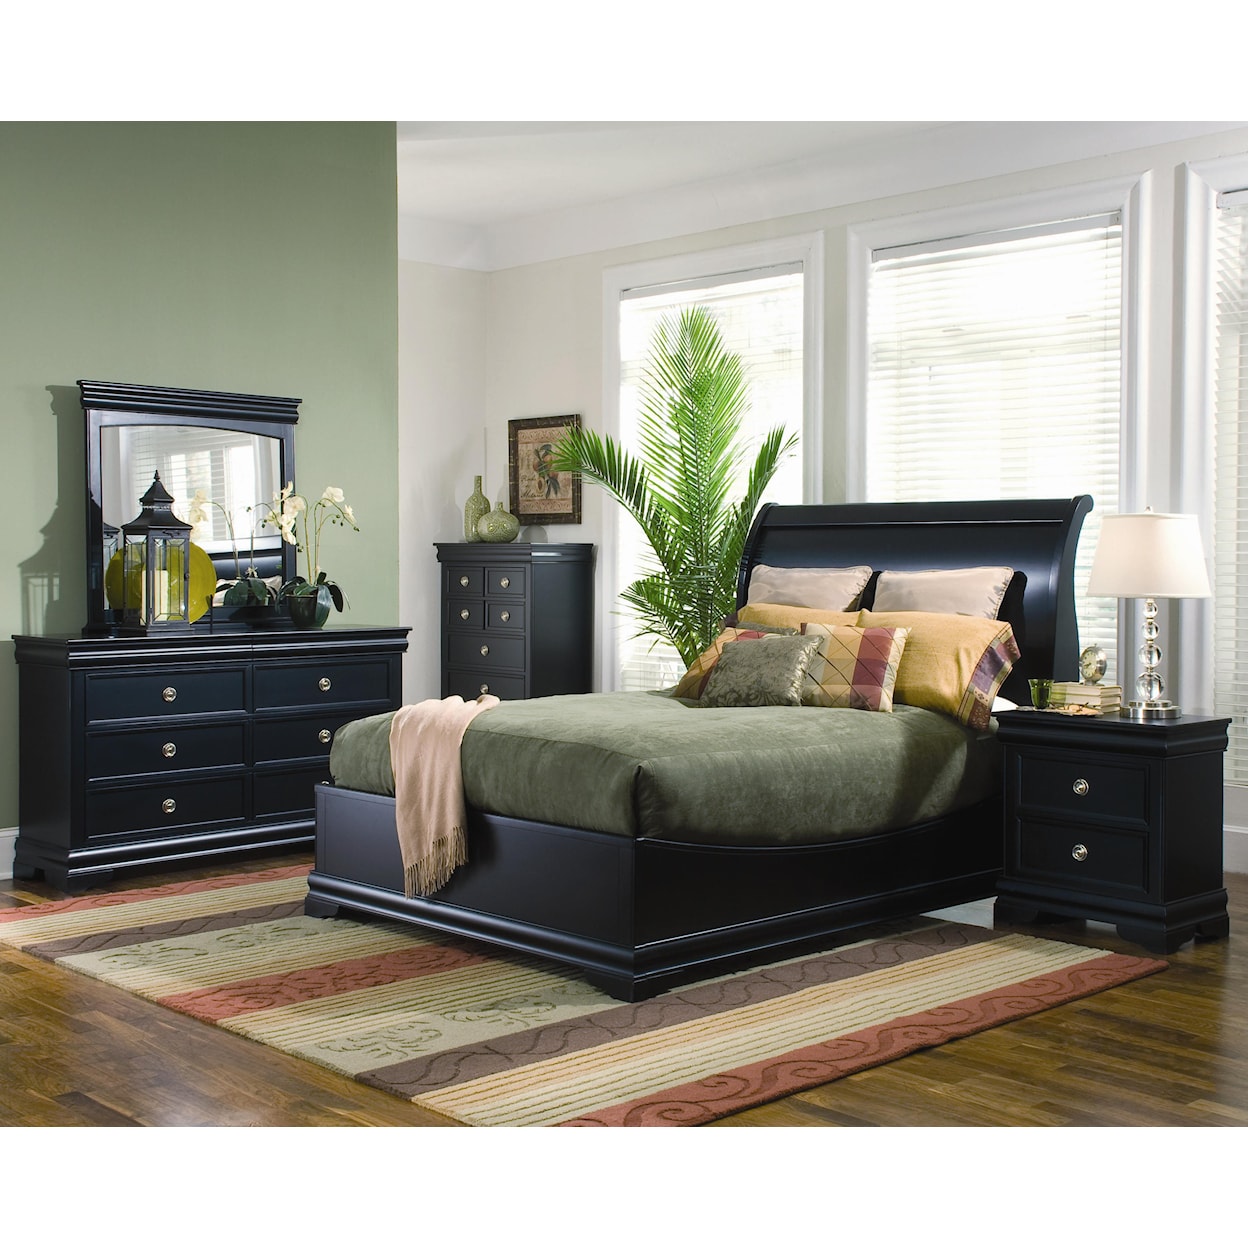 Generations by Coaster Duncan California King Bed